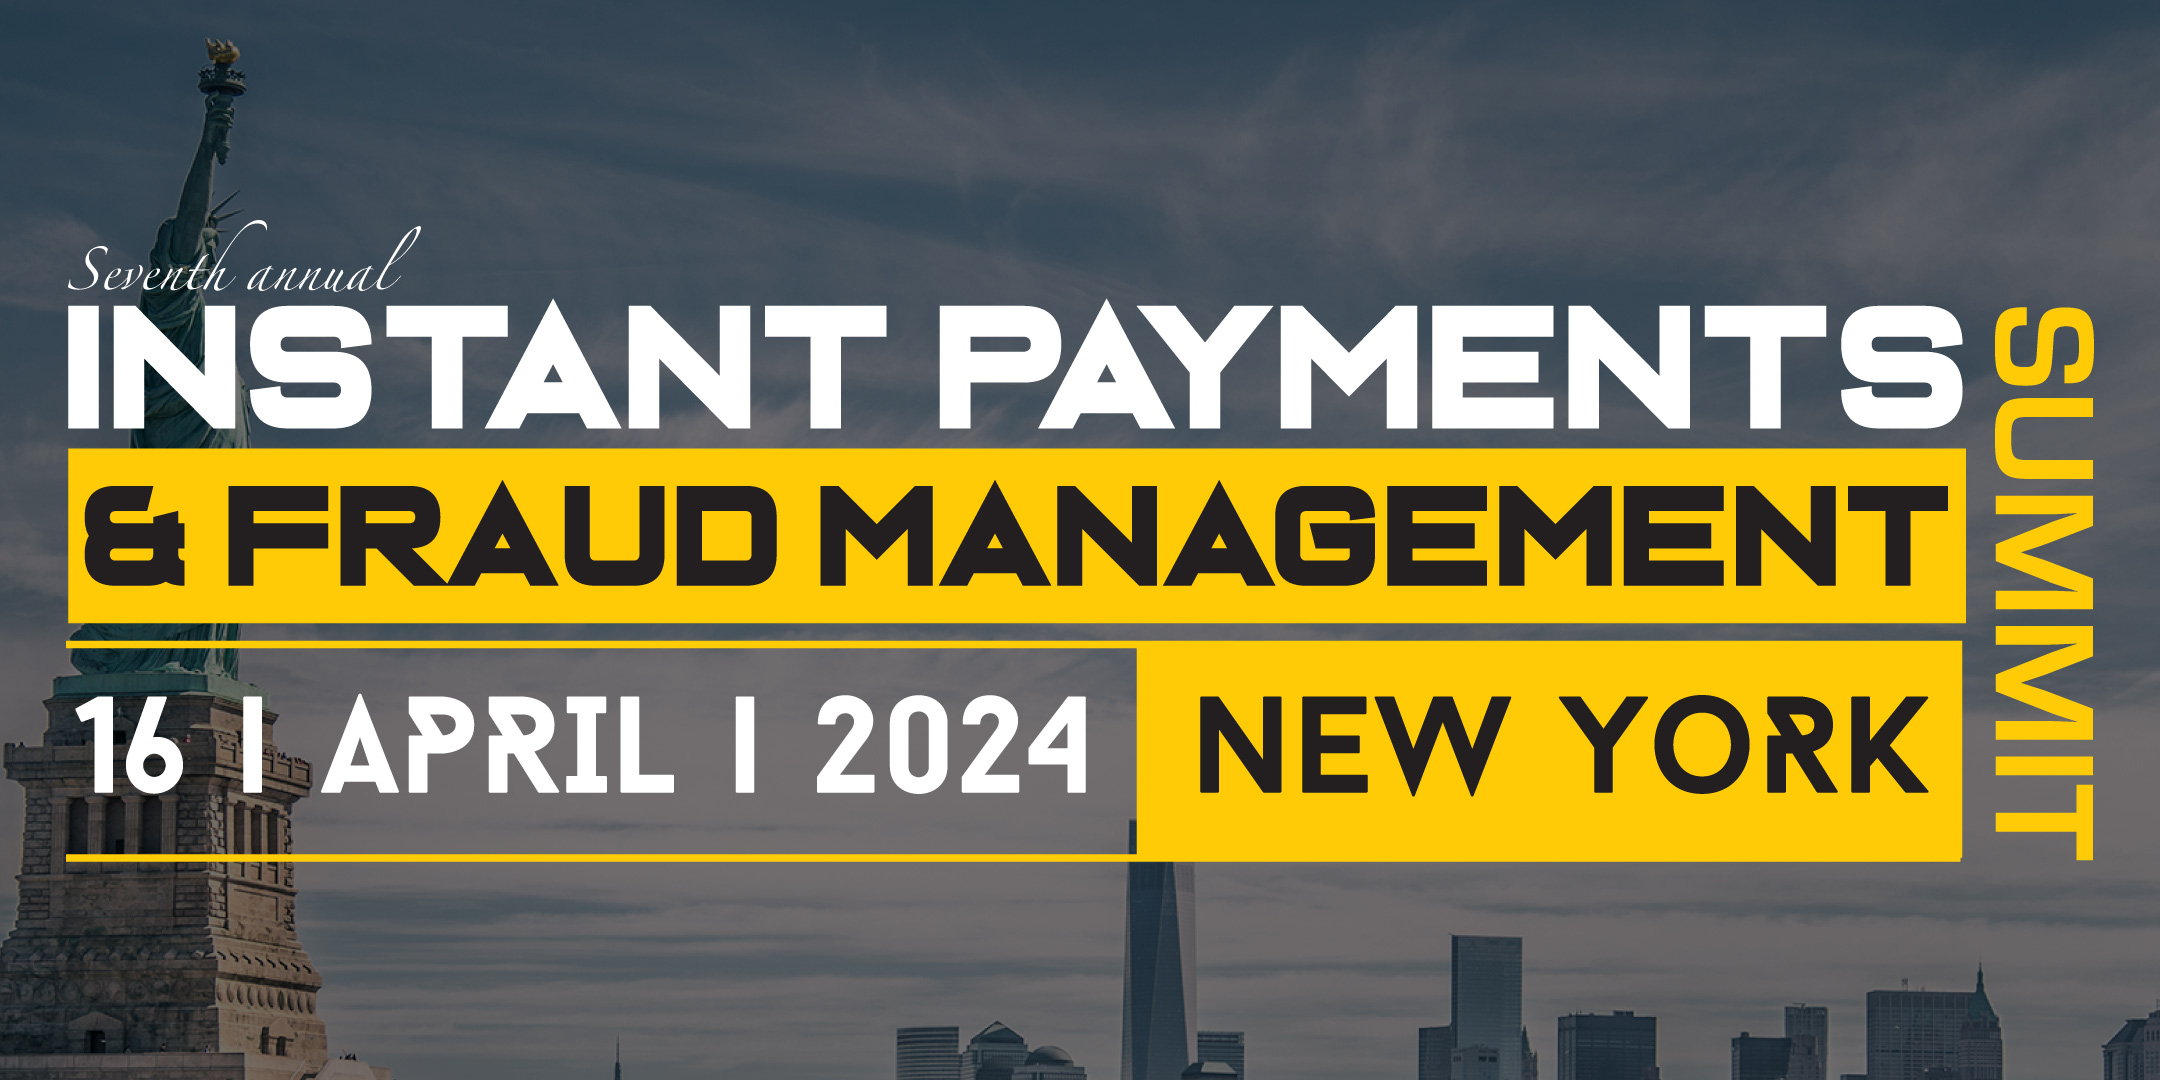 INSTANT PAYMENTS & FRAUD MANAGEMENT SUMMIT - NEW YORK, New York, United States